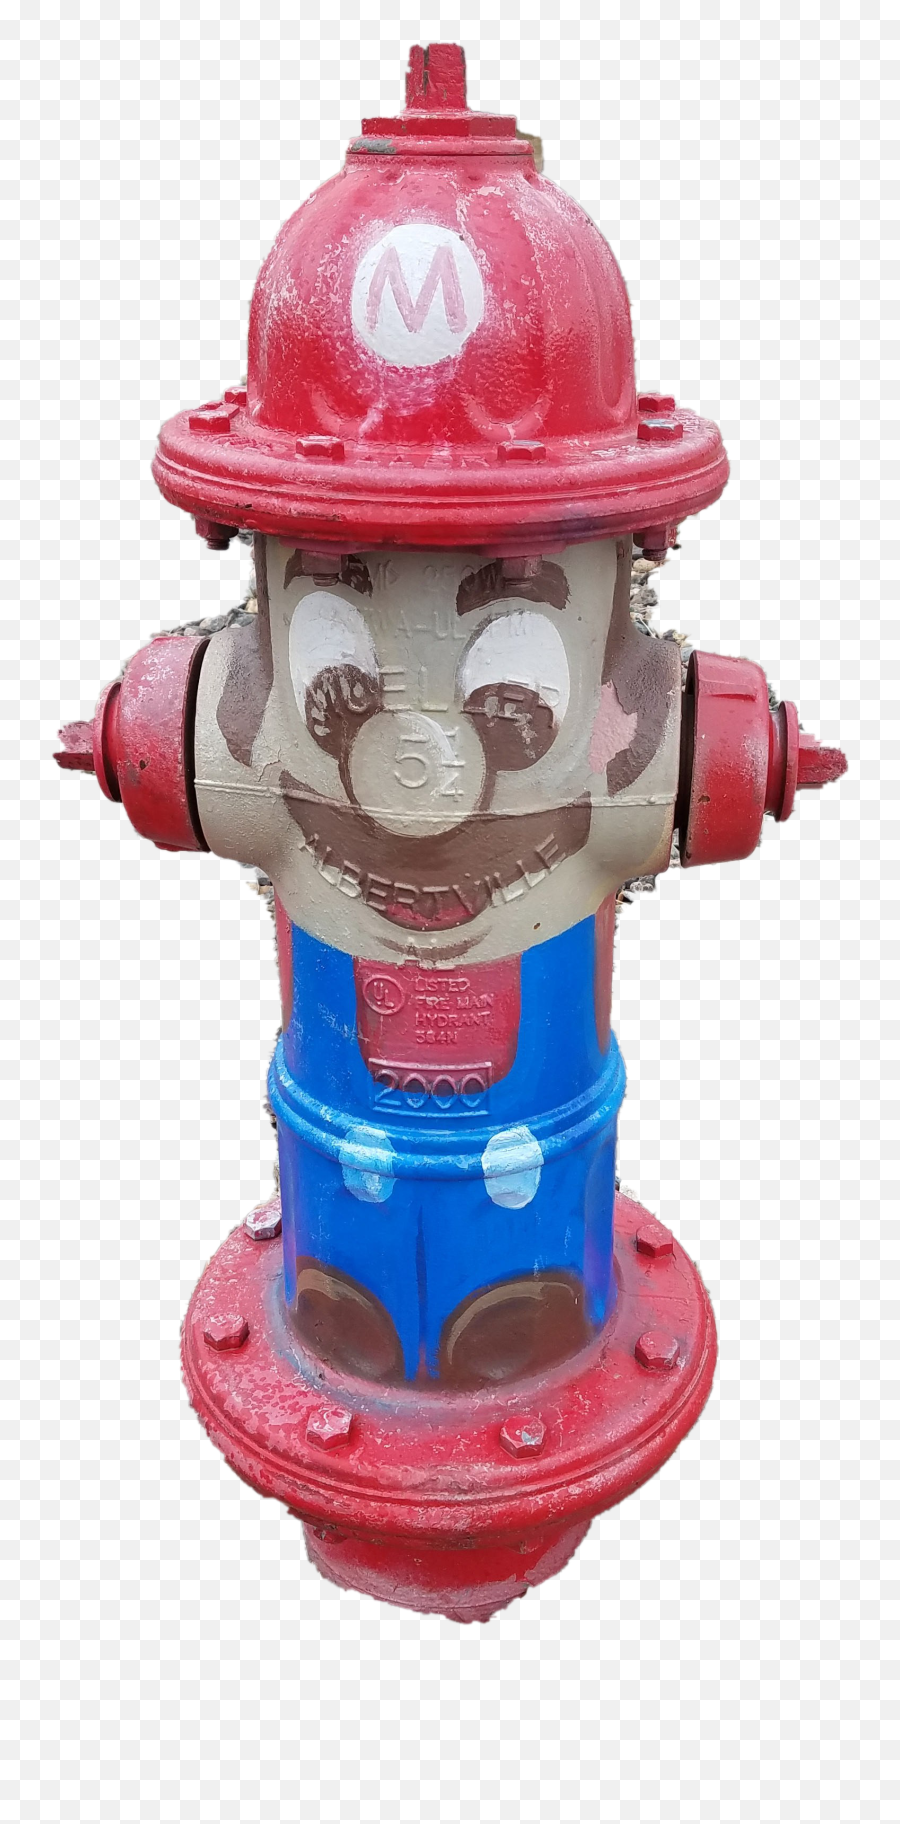 Fire Hydrant Png Clipart Background - Cylinder Emoji,Fire Hydrant Clipart